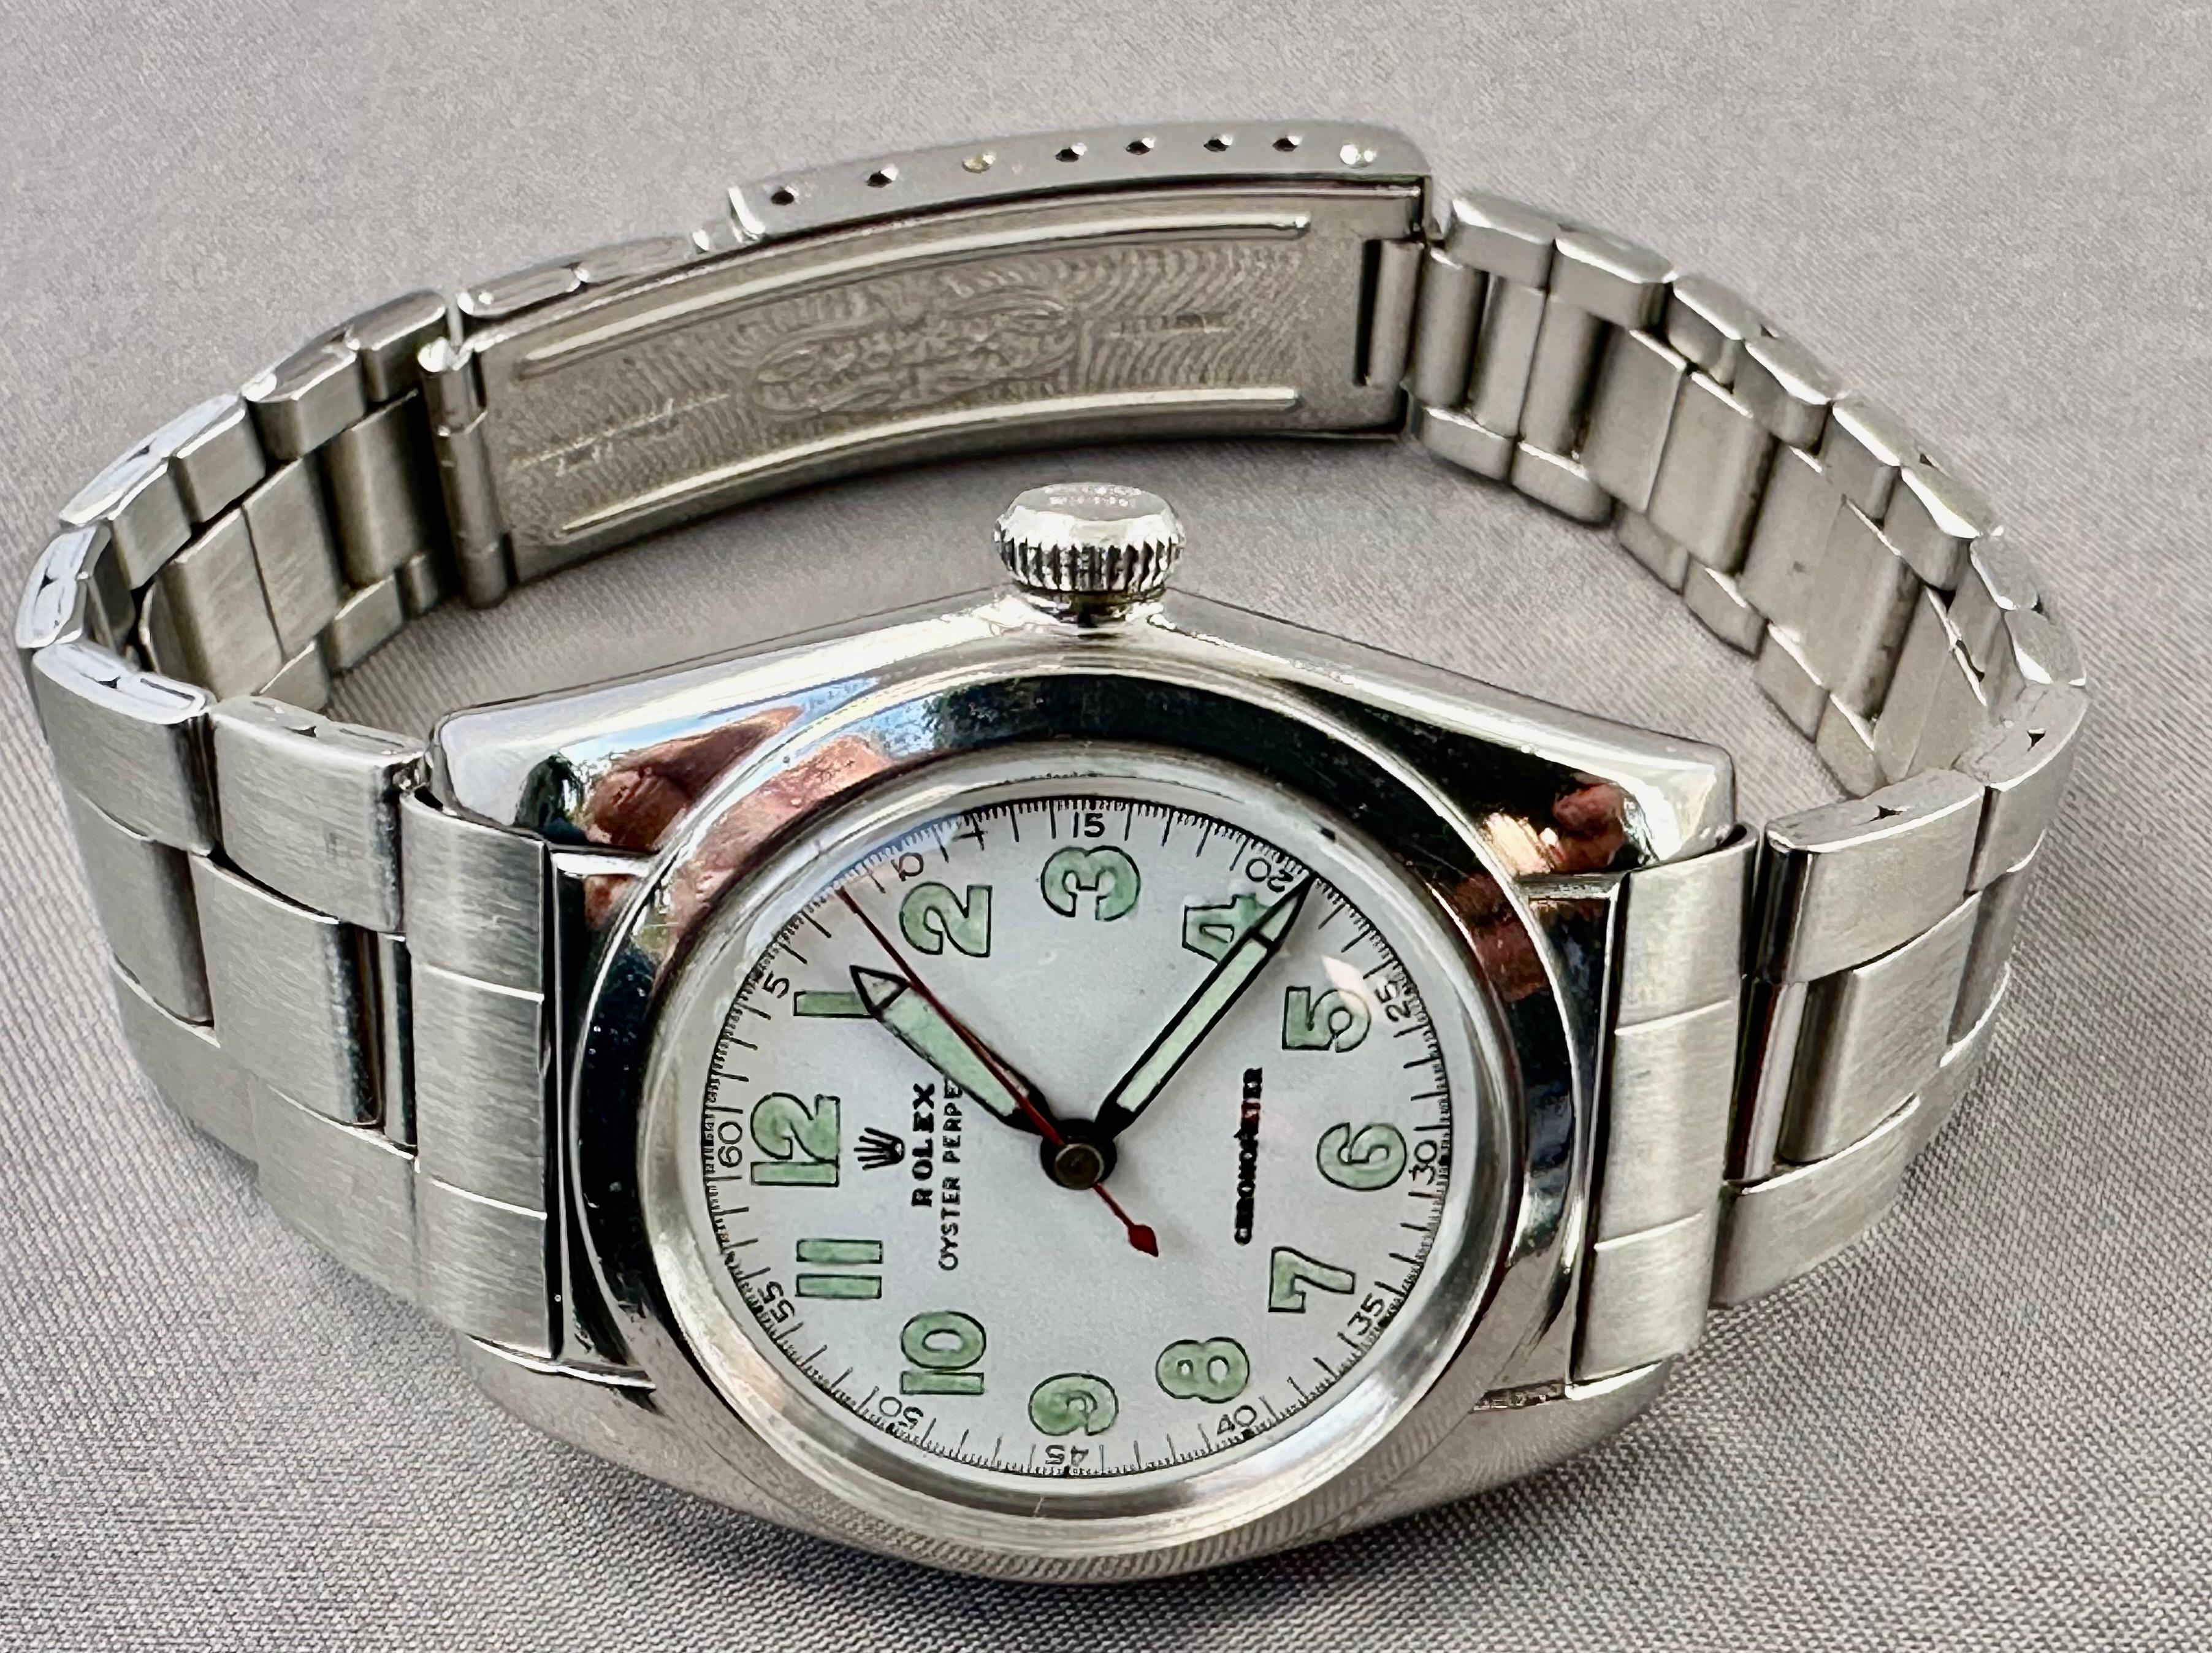 
Rolex Oyster Perpetual Chronometer Bubble Back Ref. 2940



Description / Condition: All watches have been professionally scrutinized and serviced prior to being offered for sale. Superlative, fine condition. 

Manufacturer: Rolex

Model: Rolex